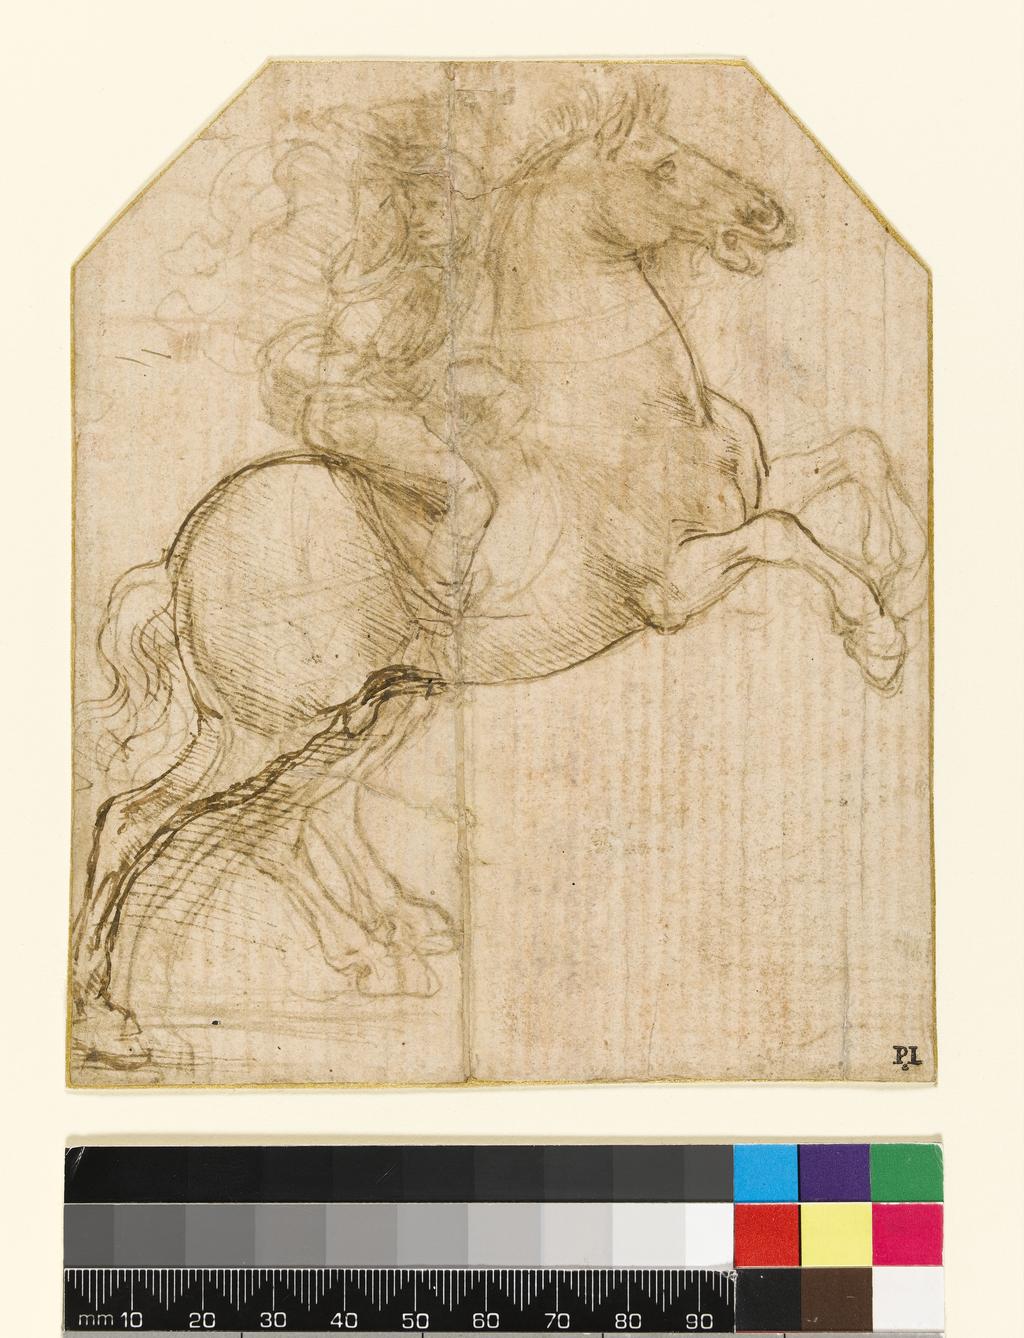 An image of A rider on a rearing horse. Leonardo da Vinci (Italian, 1452-1519). Metalpoint reinforced with pen and brown ink on a pinkish prepared surface, height 141 mm, width 119 mm. Not before 1481. Acquired from the Trustees of Colonel Norman R. Colville, deceased, by Private Treaty Sale from the Gow, Cunliffe, Leverton Harris, Perrins and Reitlinger funds, with a contribution from The Art Fund, The National Lottery through the Heritage Lottery Fund and a grant from the Pilgrim Trust, with contributions from Mrs Monica Beck, David Scrase and an anonymous donor, 1999.